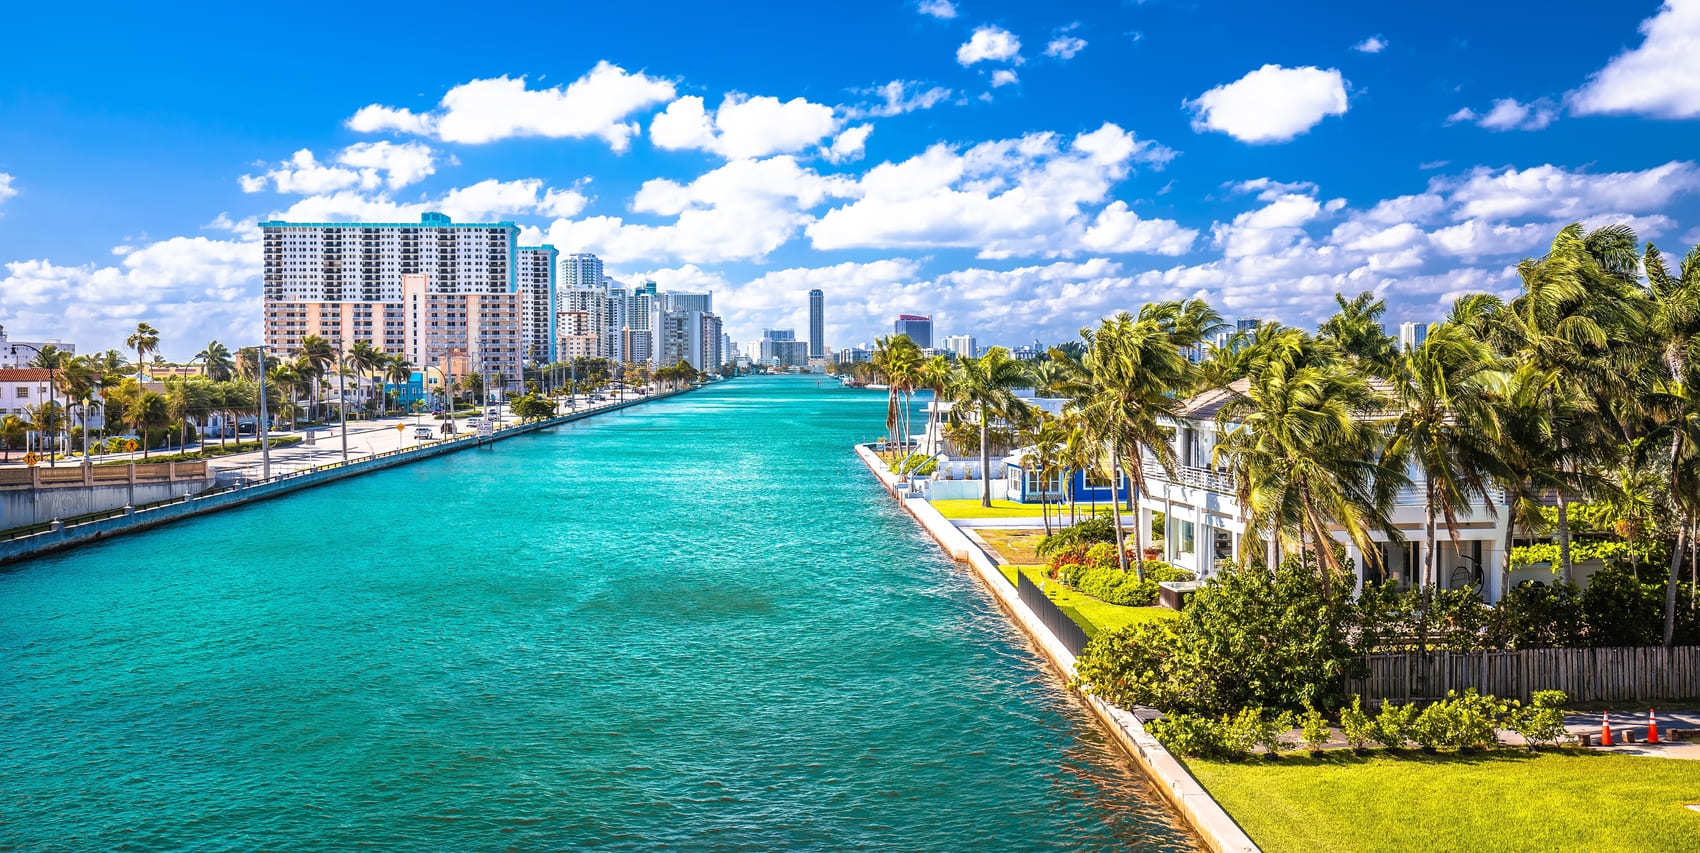 Rich blue waters overlooking Hollywood, Florida during the day.